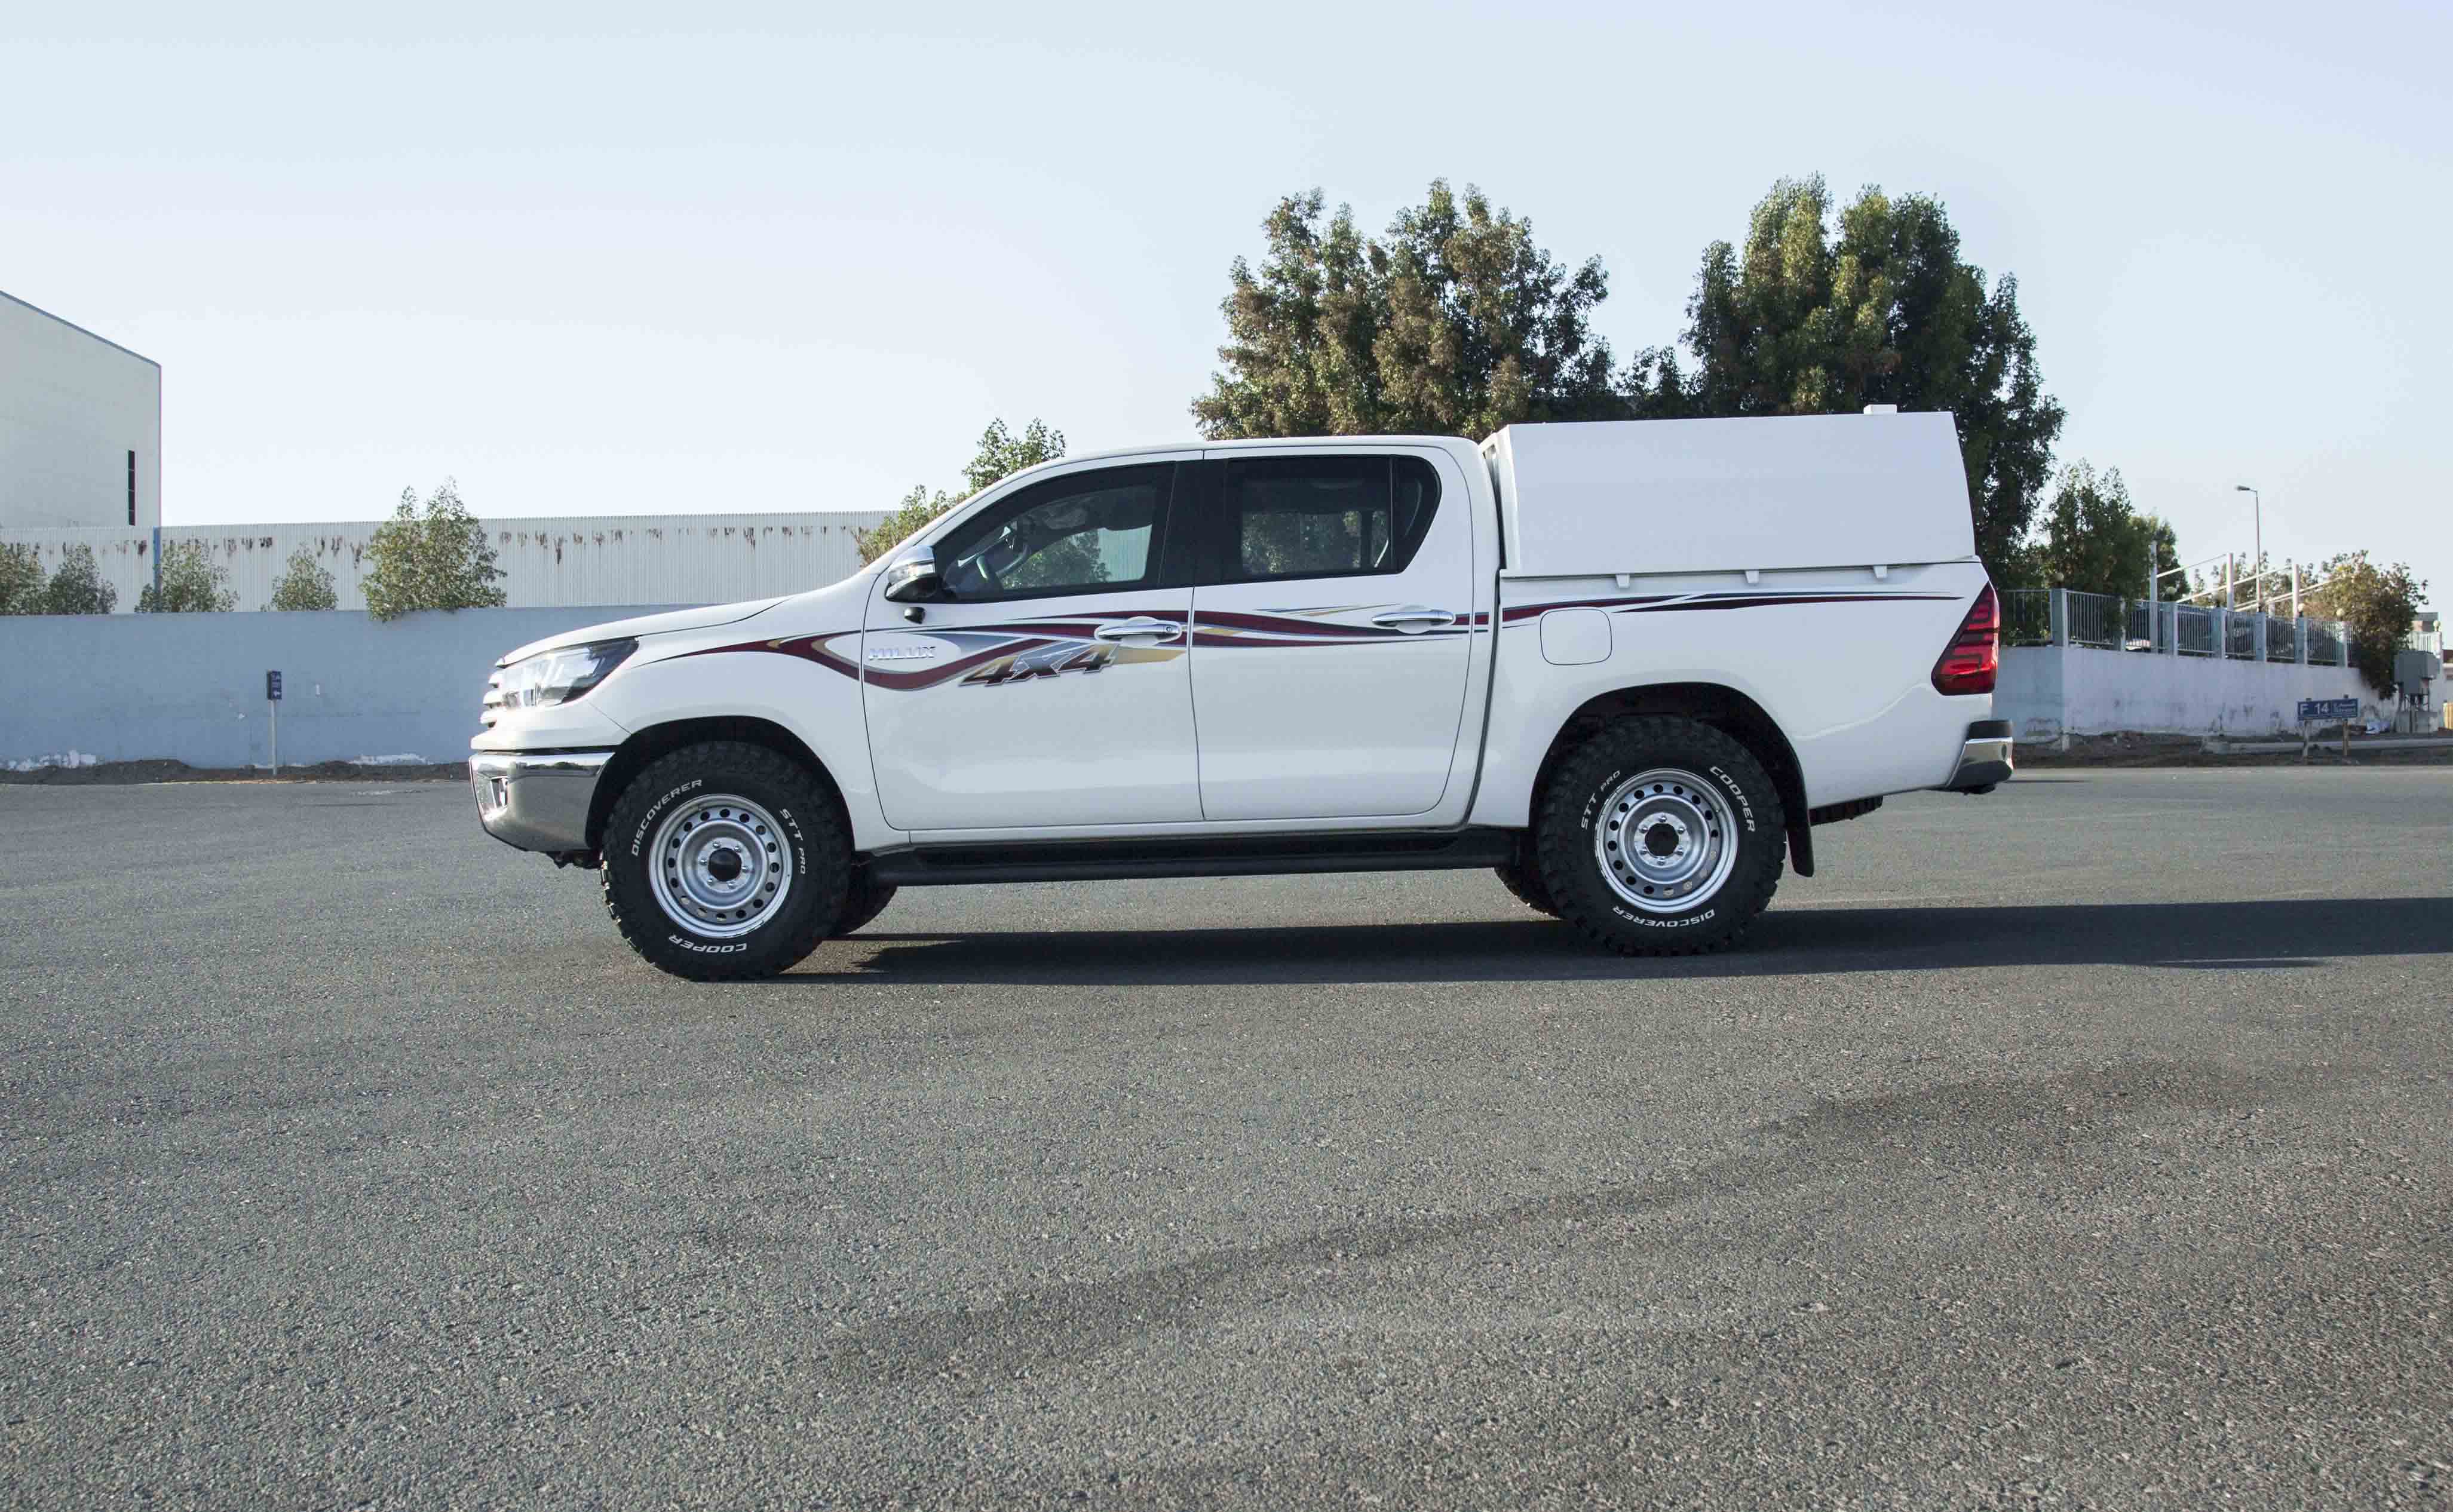        The Armoured CIT Toyota Hilux Pick Up